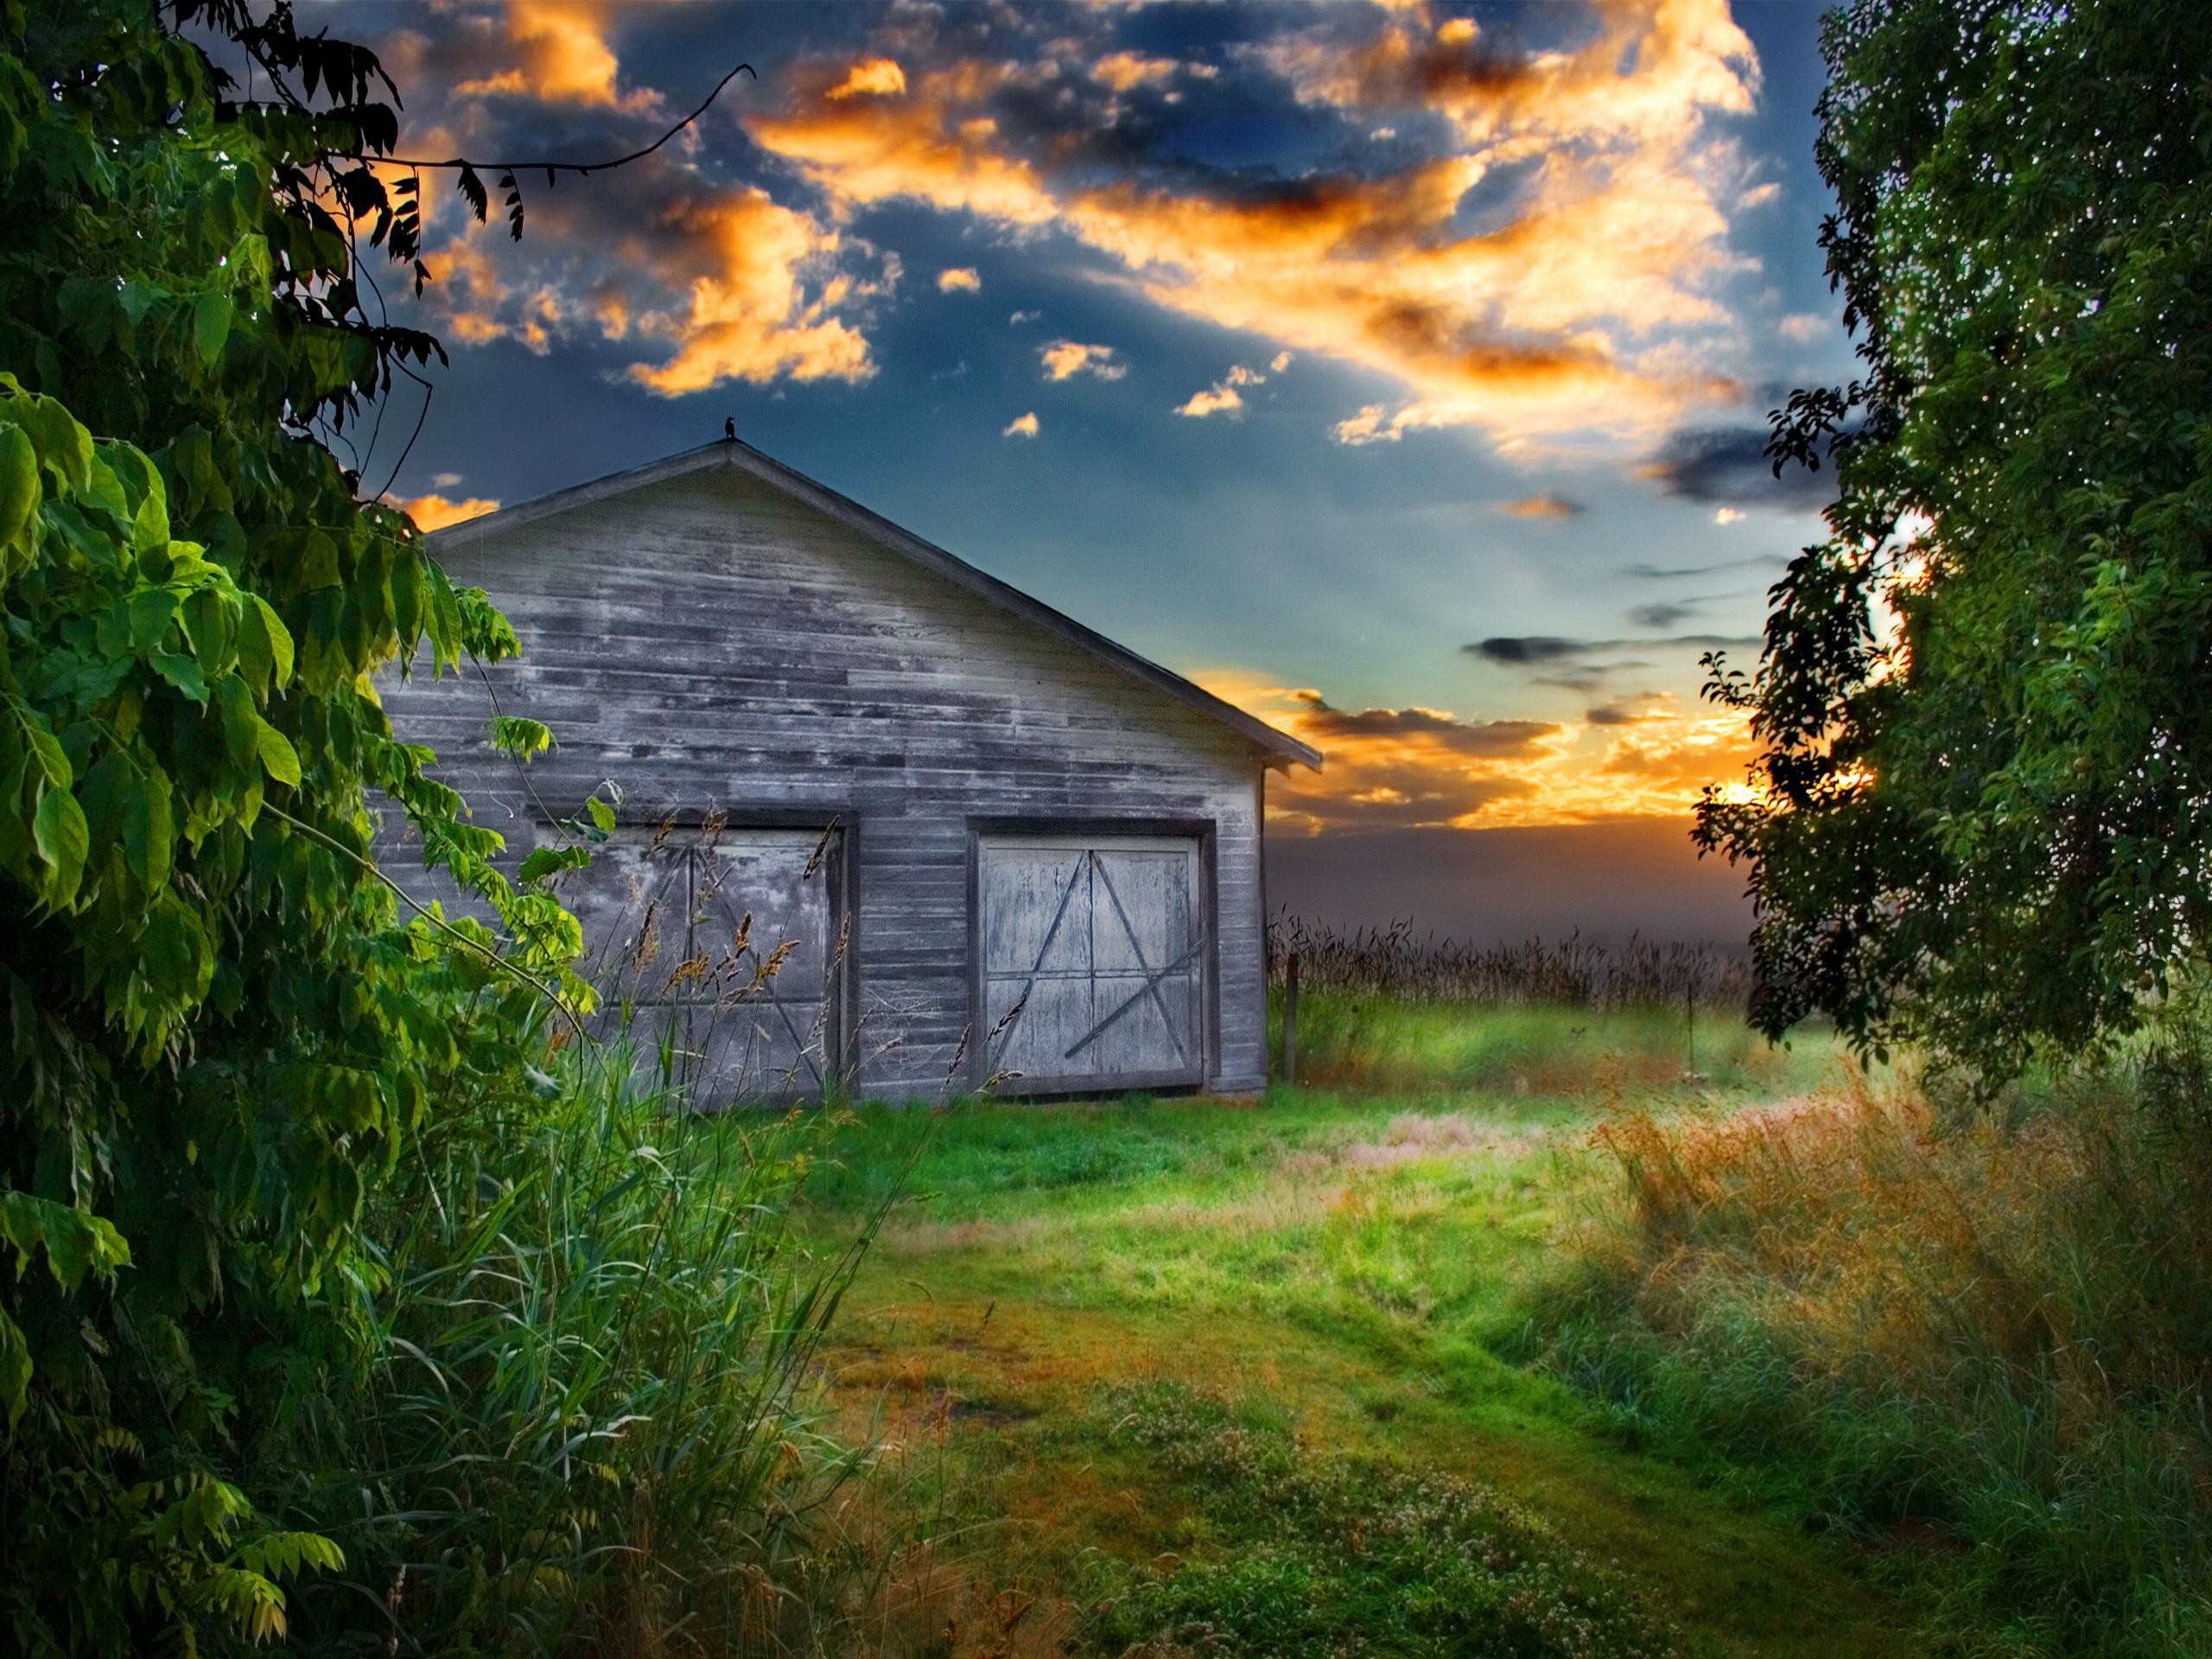 2560x1920 An, Old, Barn, At, Sunset, Hd Wallpapers, Artwork, High Quality, 2560Ã1920  Wallpaper HD